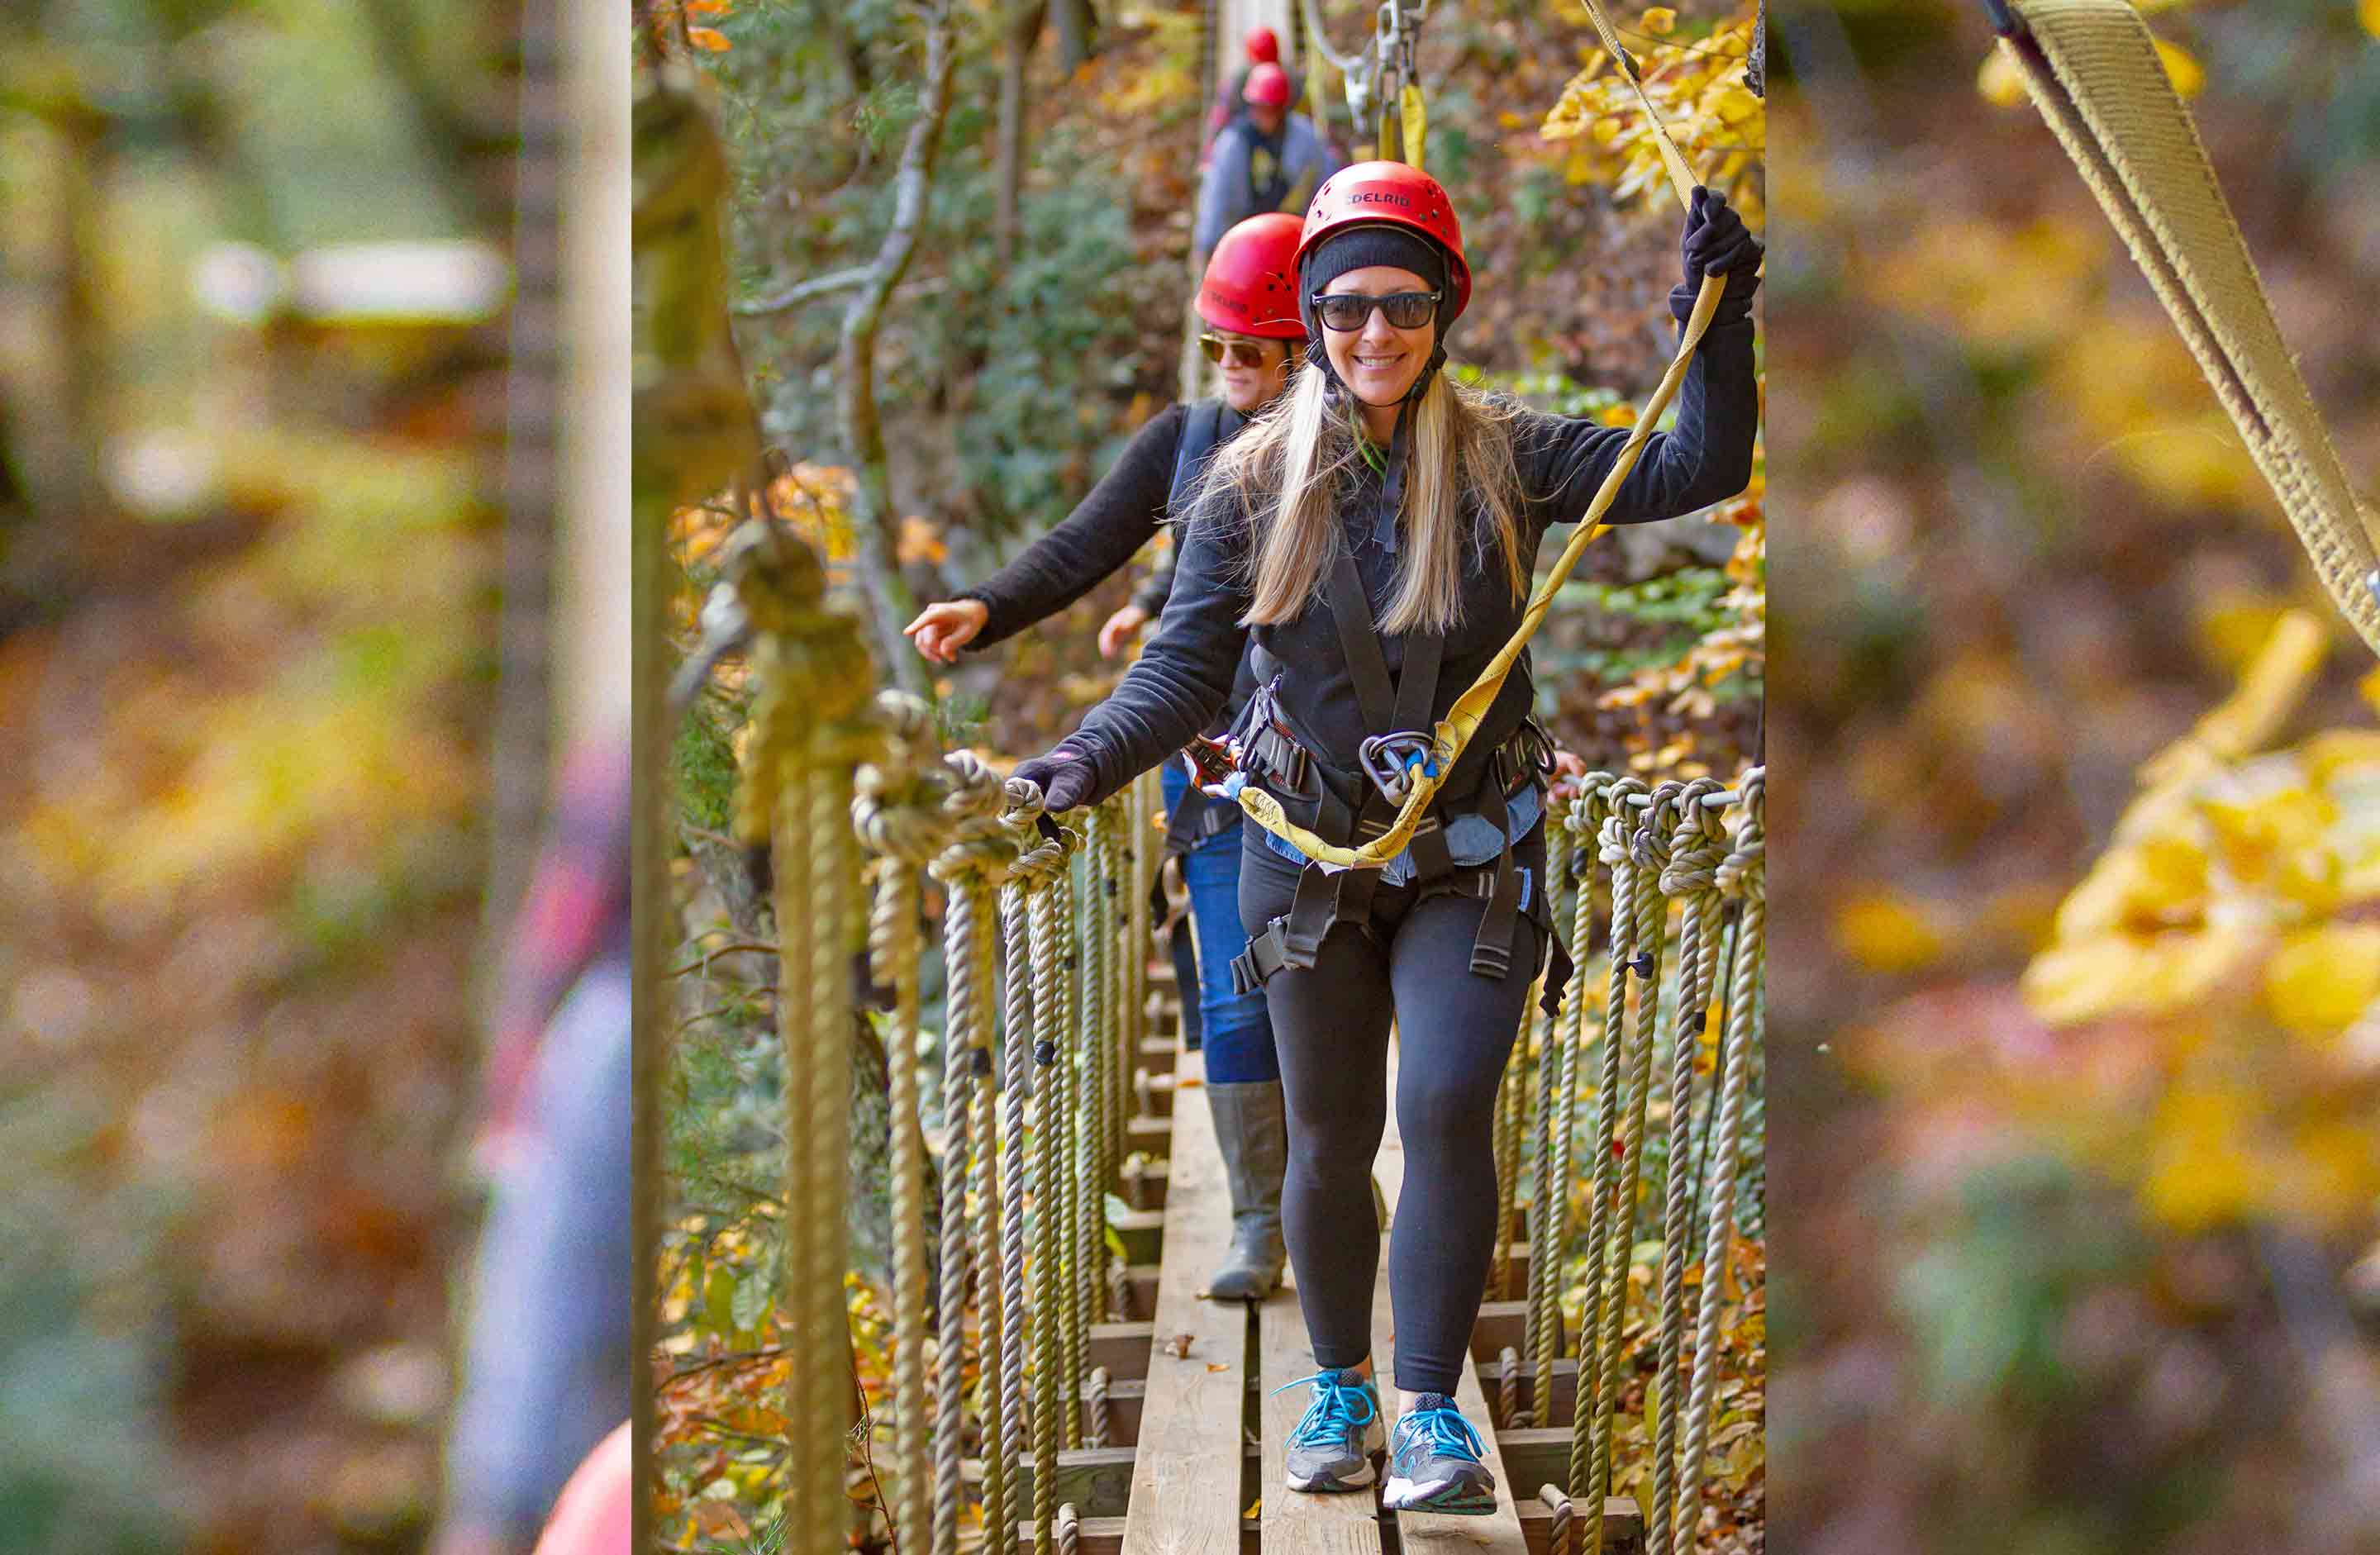 A group crosses the swinging rope bridge in the tree tops at the fall zip line course at ACE Adventure Resort in the New River Gorge, WV.